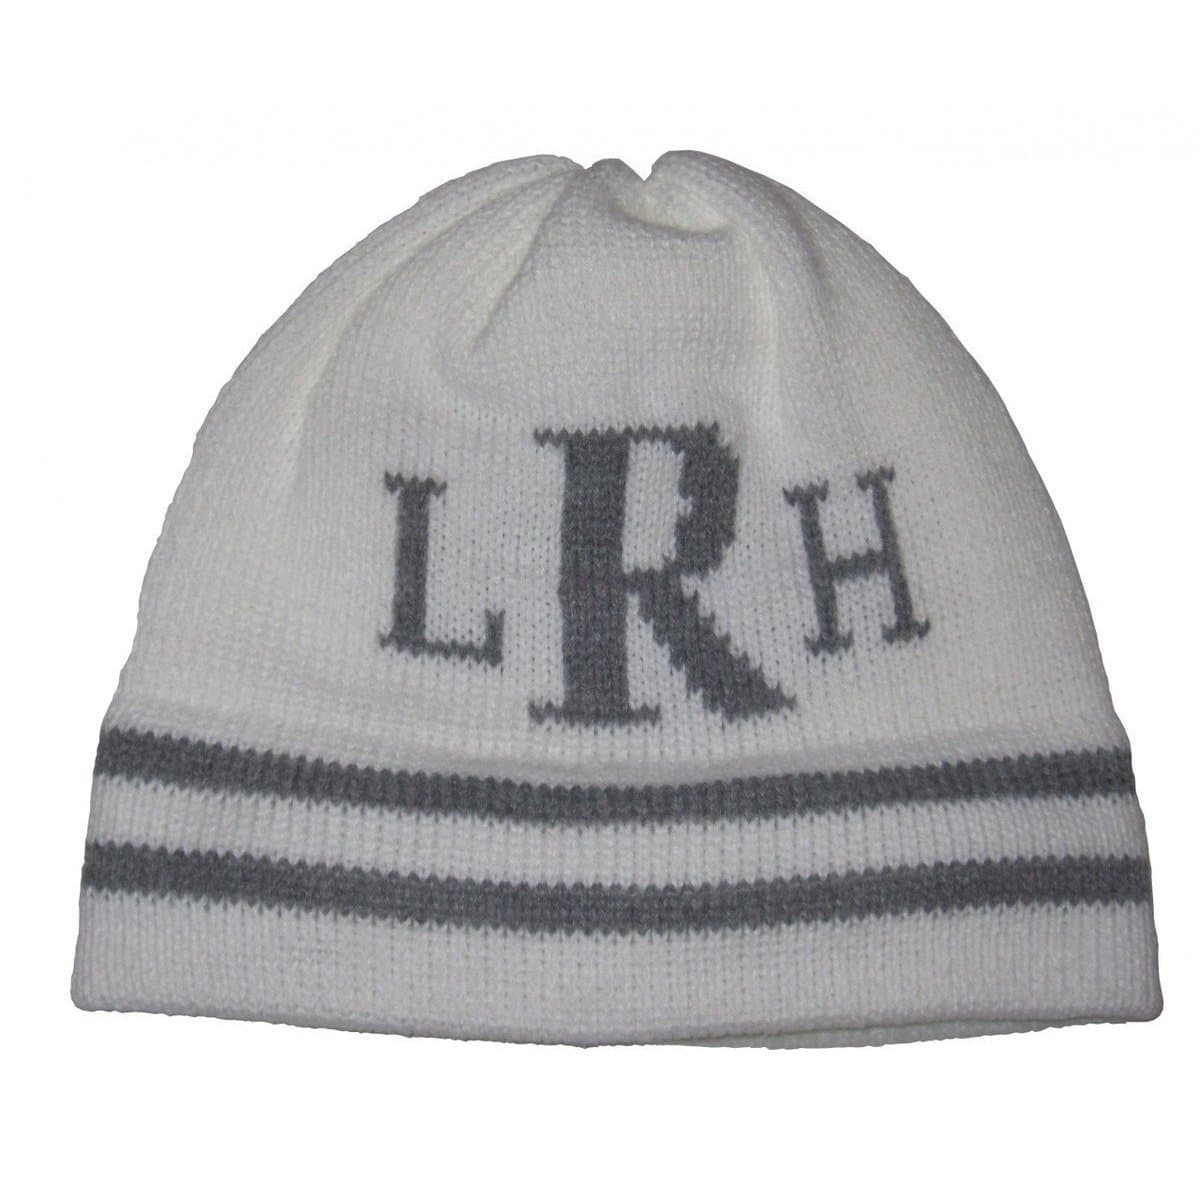 Classic Monogram & Stripes Personalized Knit Hat-Hats-Jack and Jill Boutique